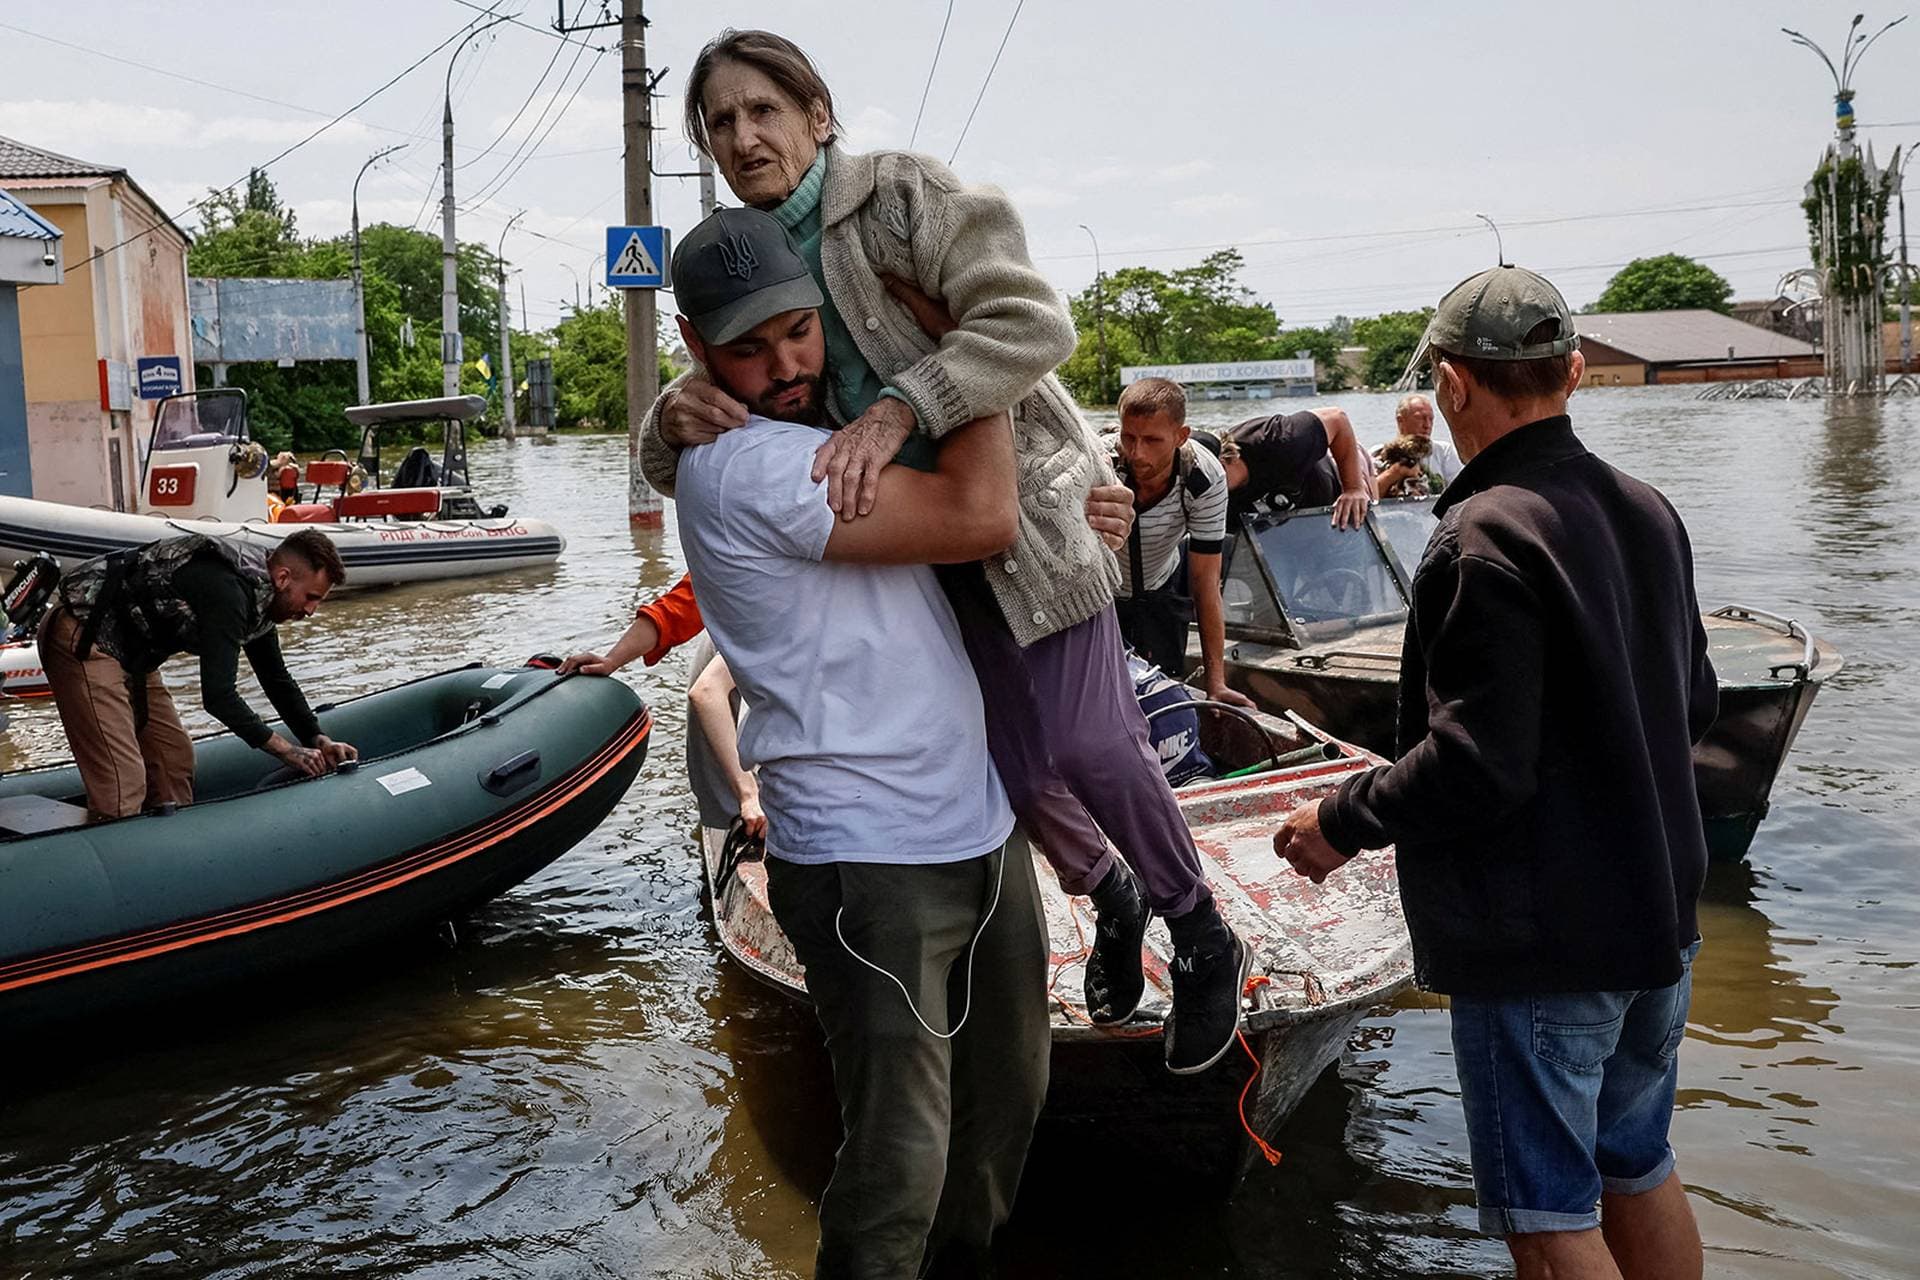 Volunteers evacuate local residents from a flooded area in Kherson